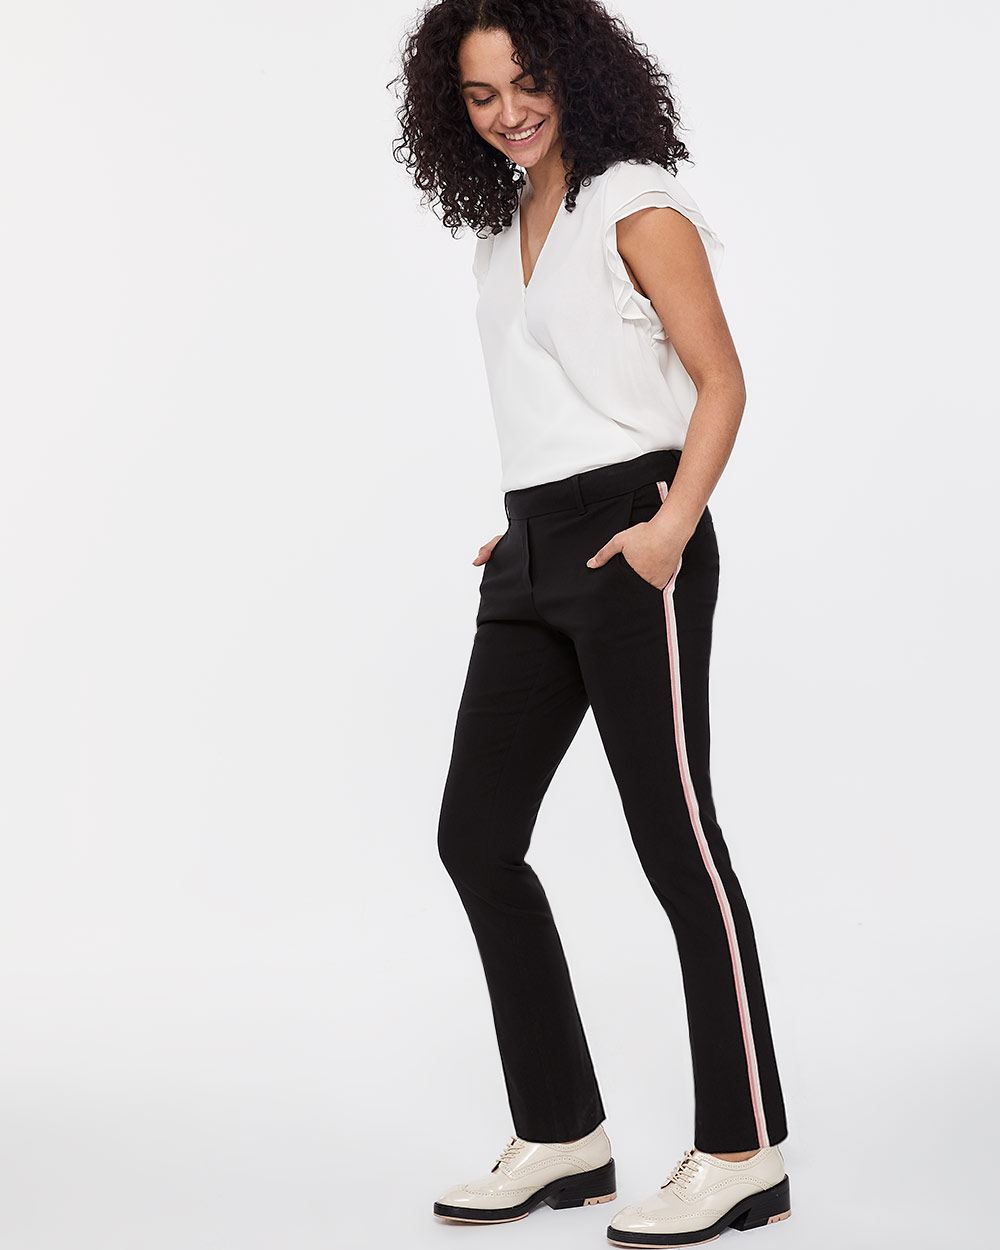 The Iconic Straight Leg Pants with Contrasting Band